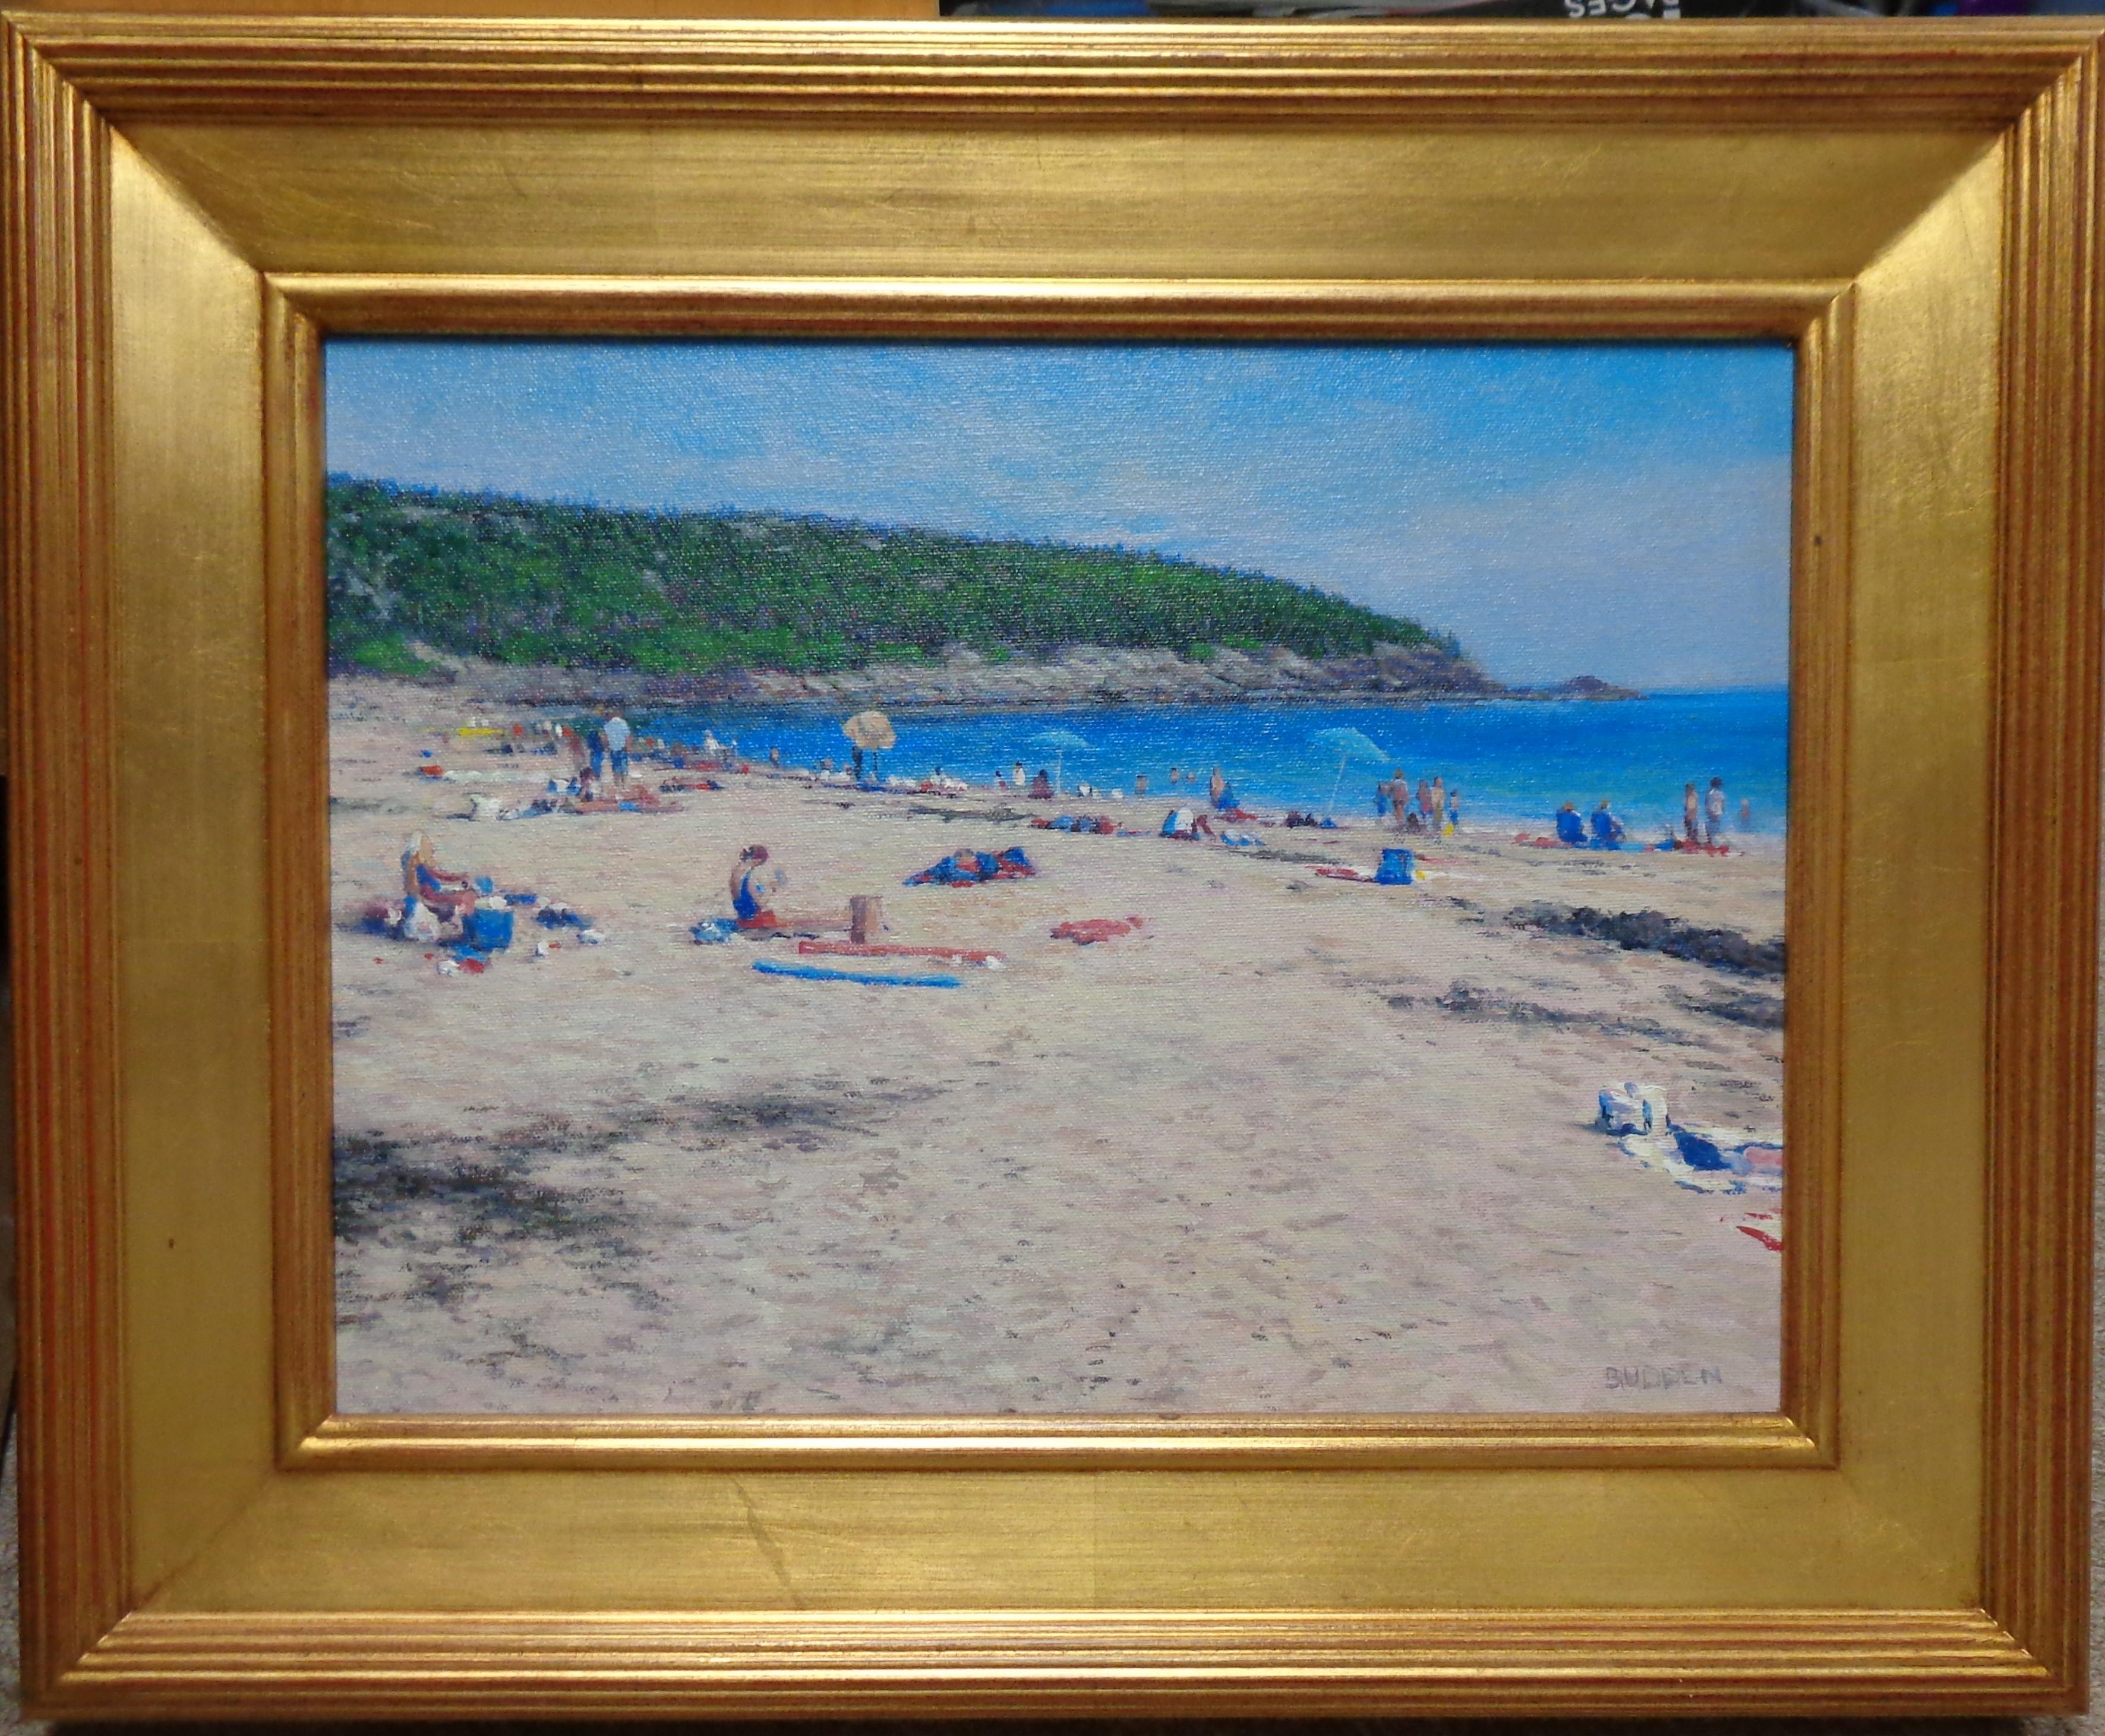 Sand Beach Acadia is an oil on panel painting completed in the studio. The painting was completed in an impressionistic realism style capturing a sunny day in Acadia National Park.
ARTIST'S STATEMENT
I have been in the art business as an artist and